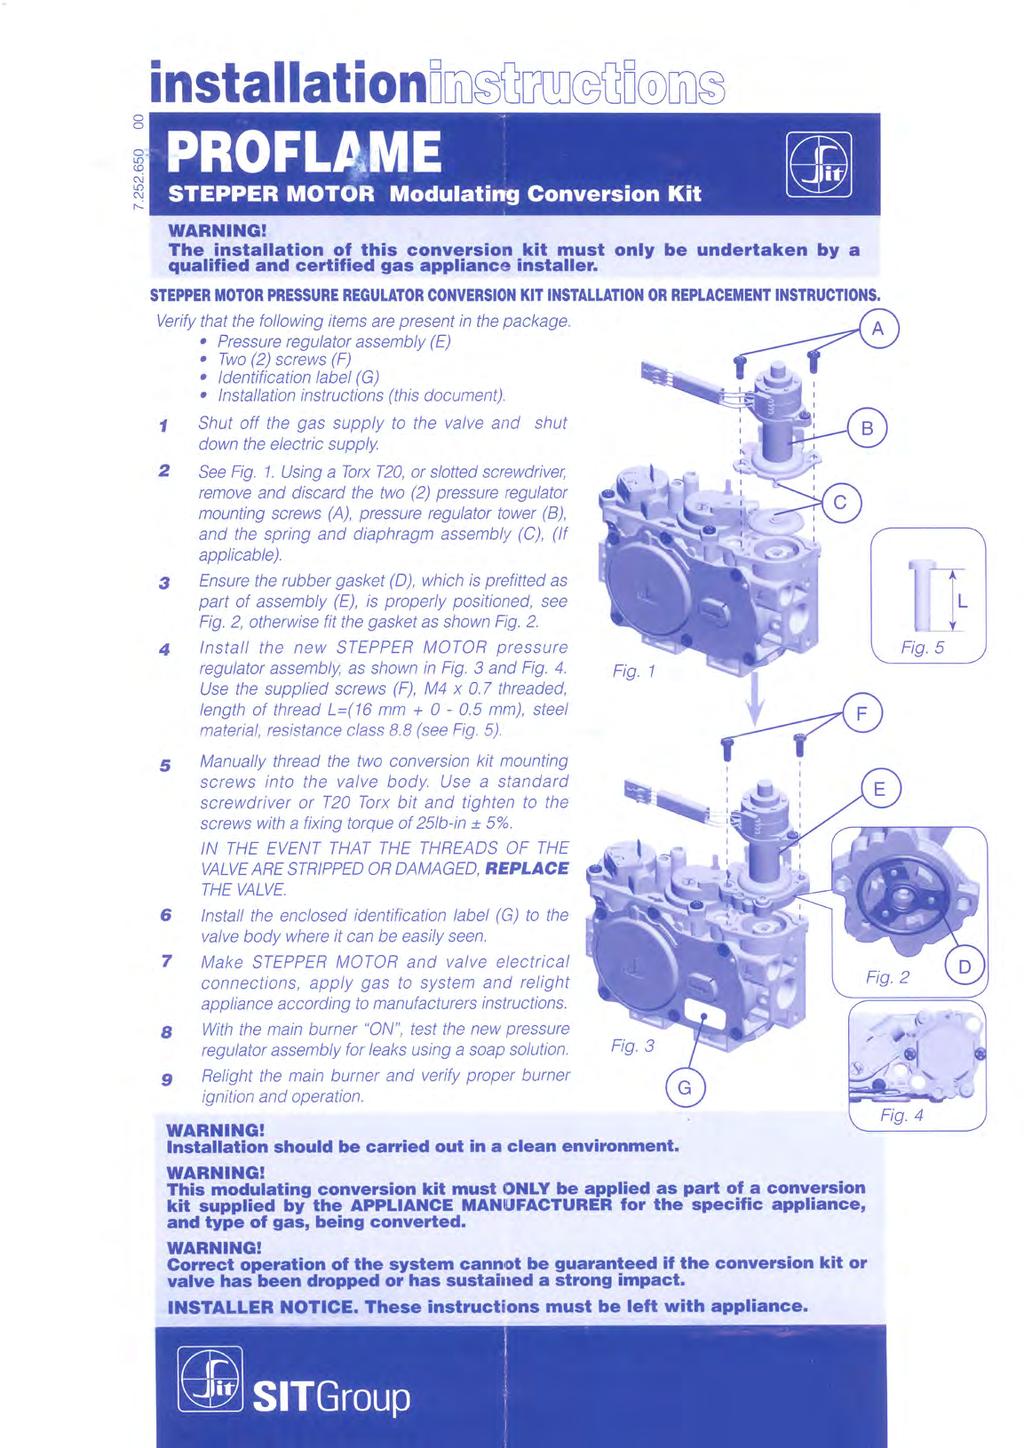 RX300 Optional stepper motor install/replace Verify that the following items are present in the package.